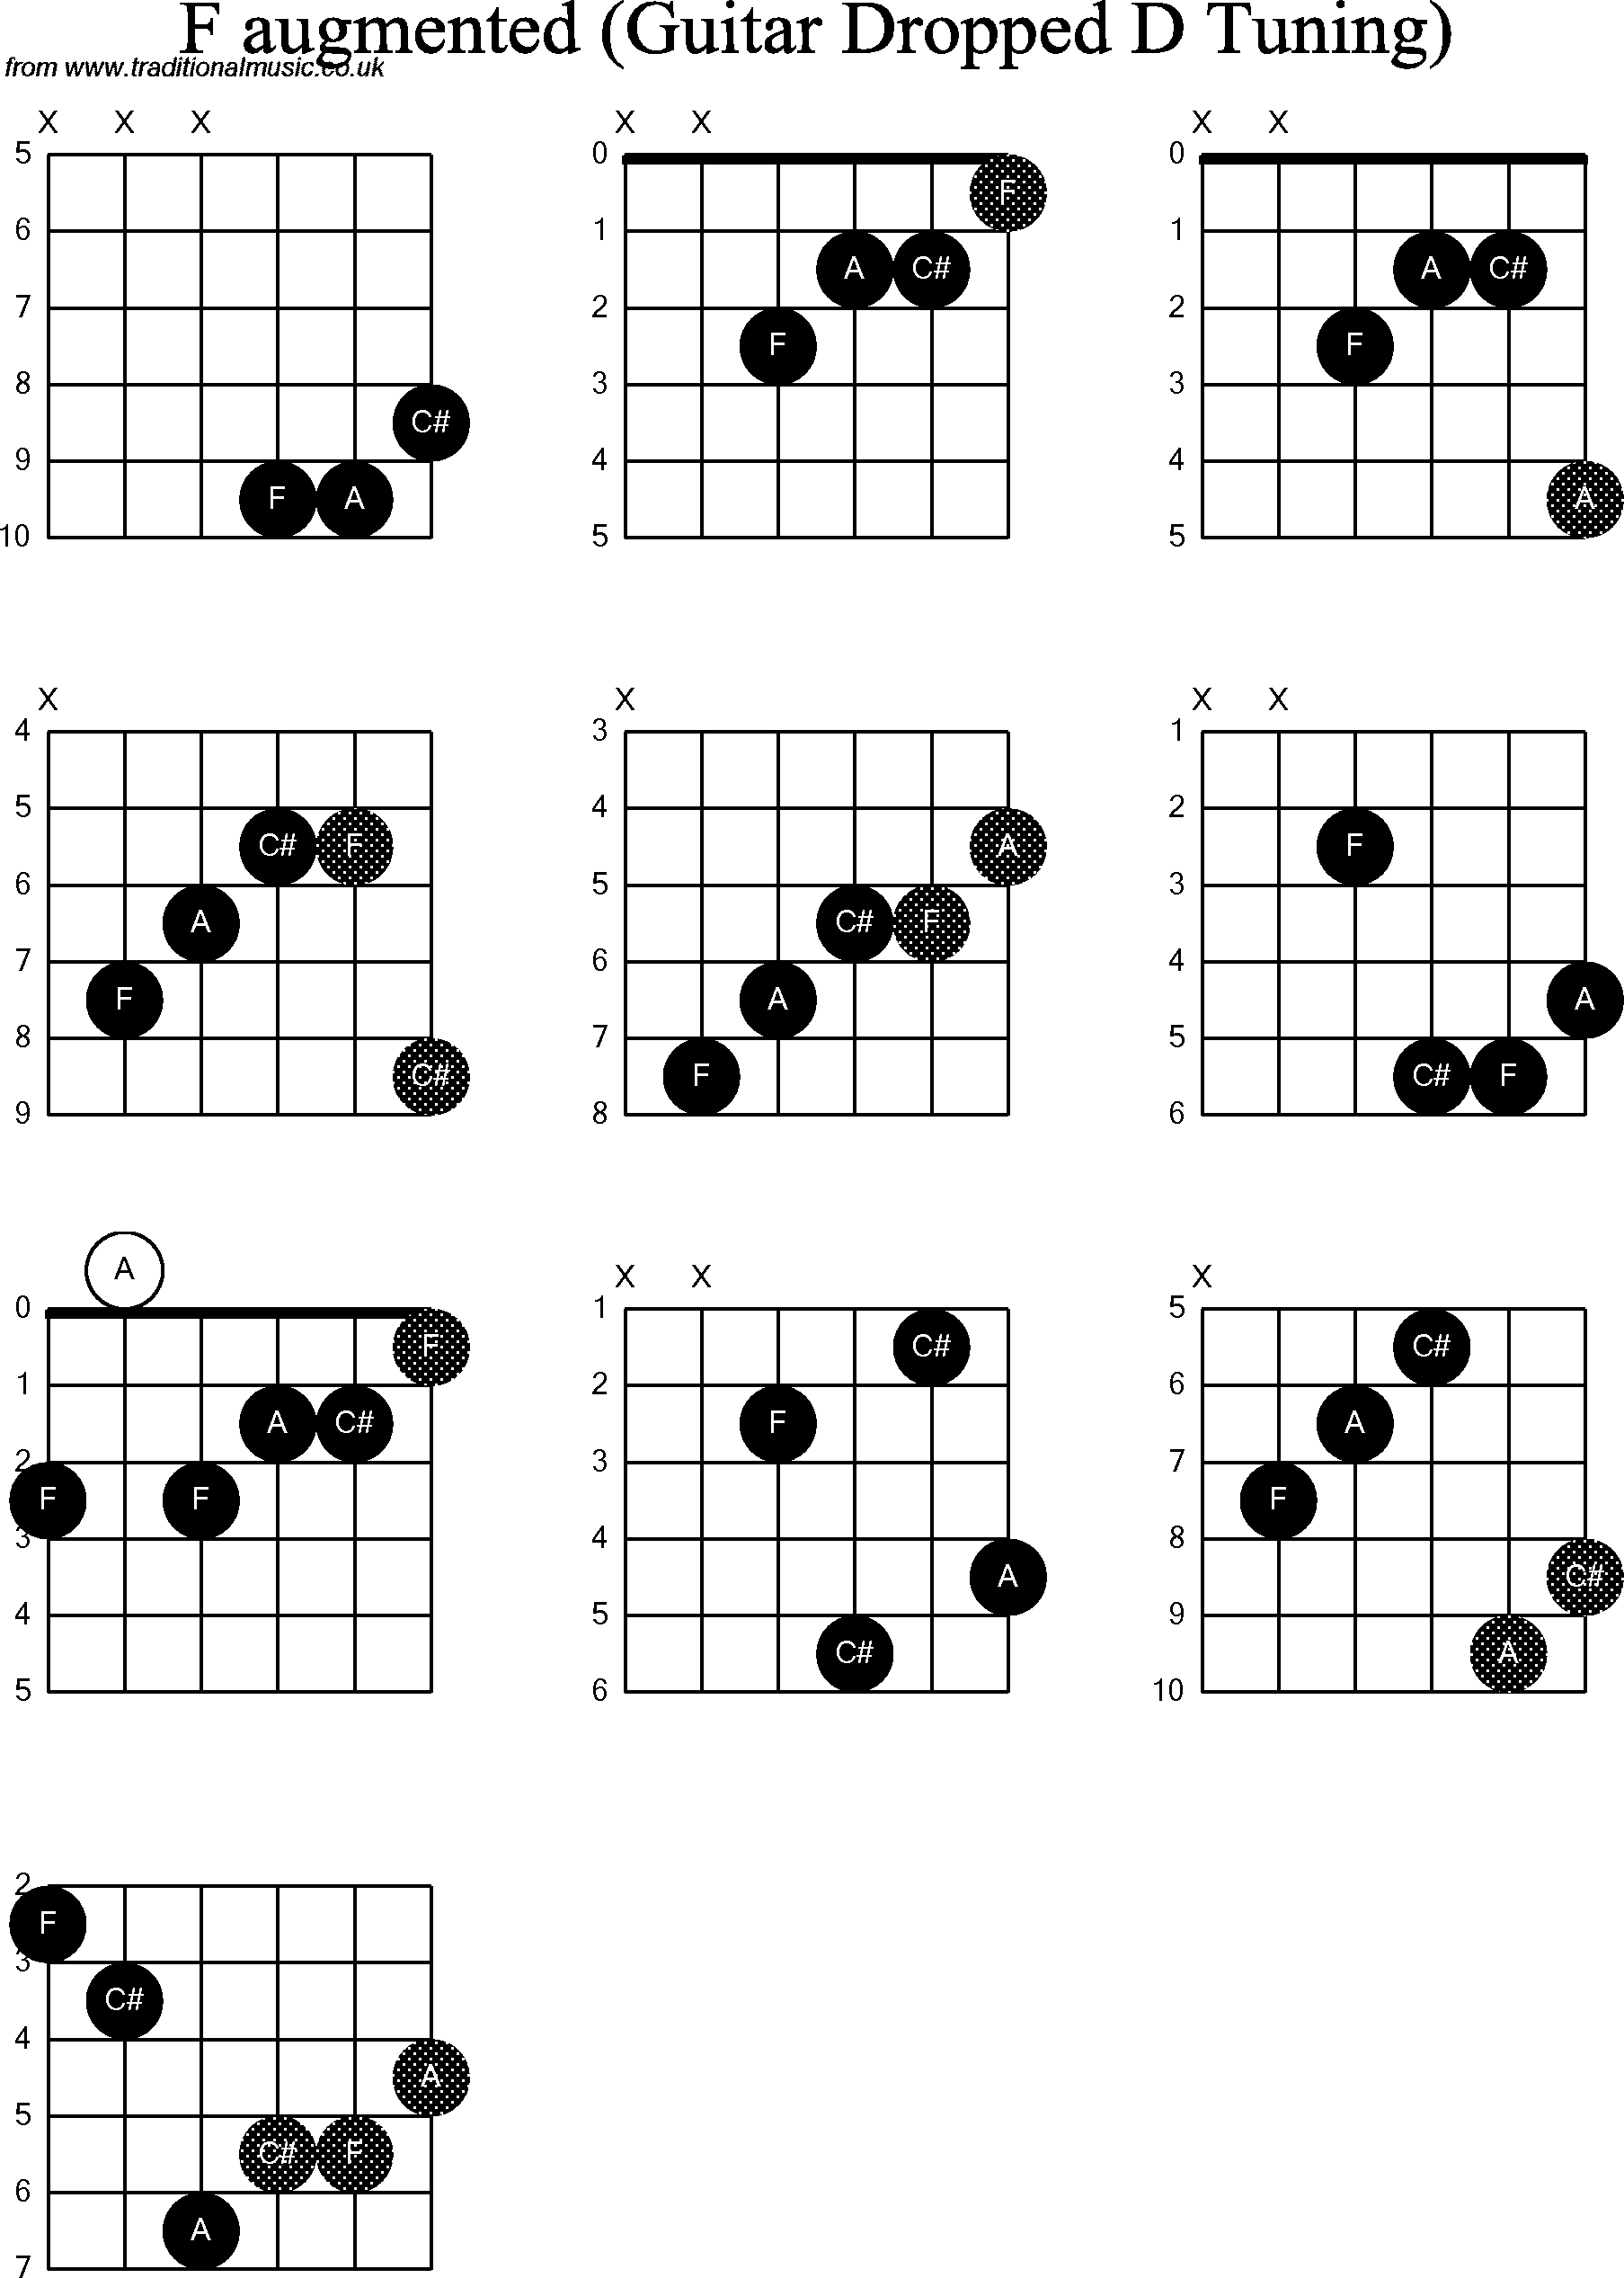 Chord diagrams for dropped D Guitar(DADGBE), F Augmented